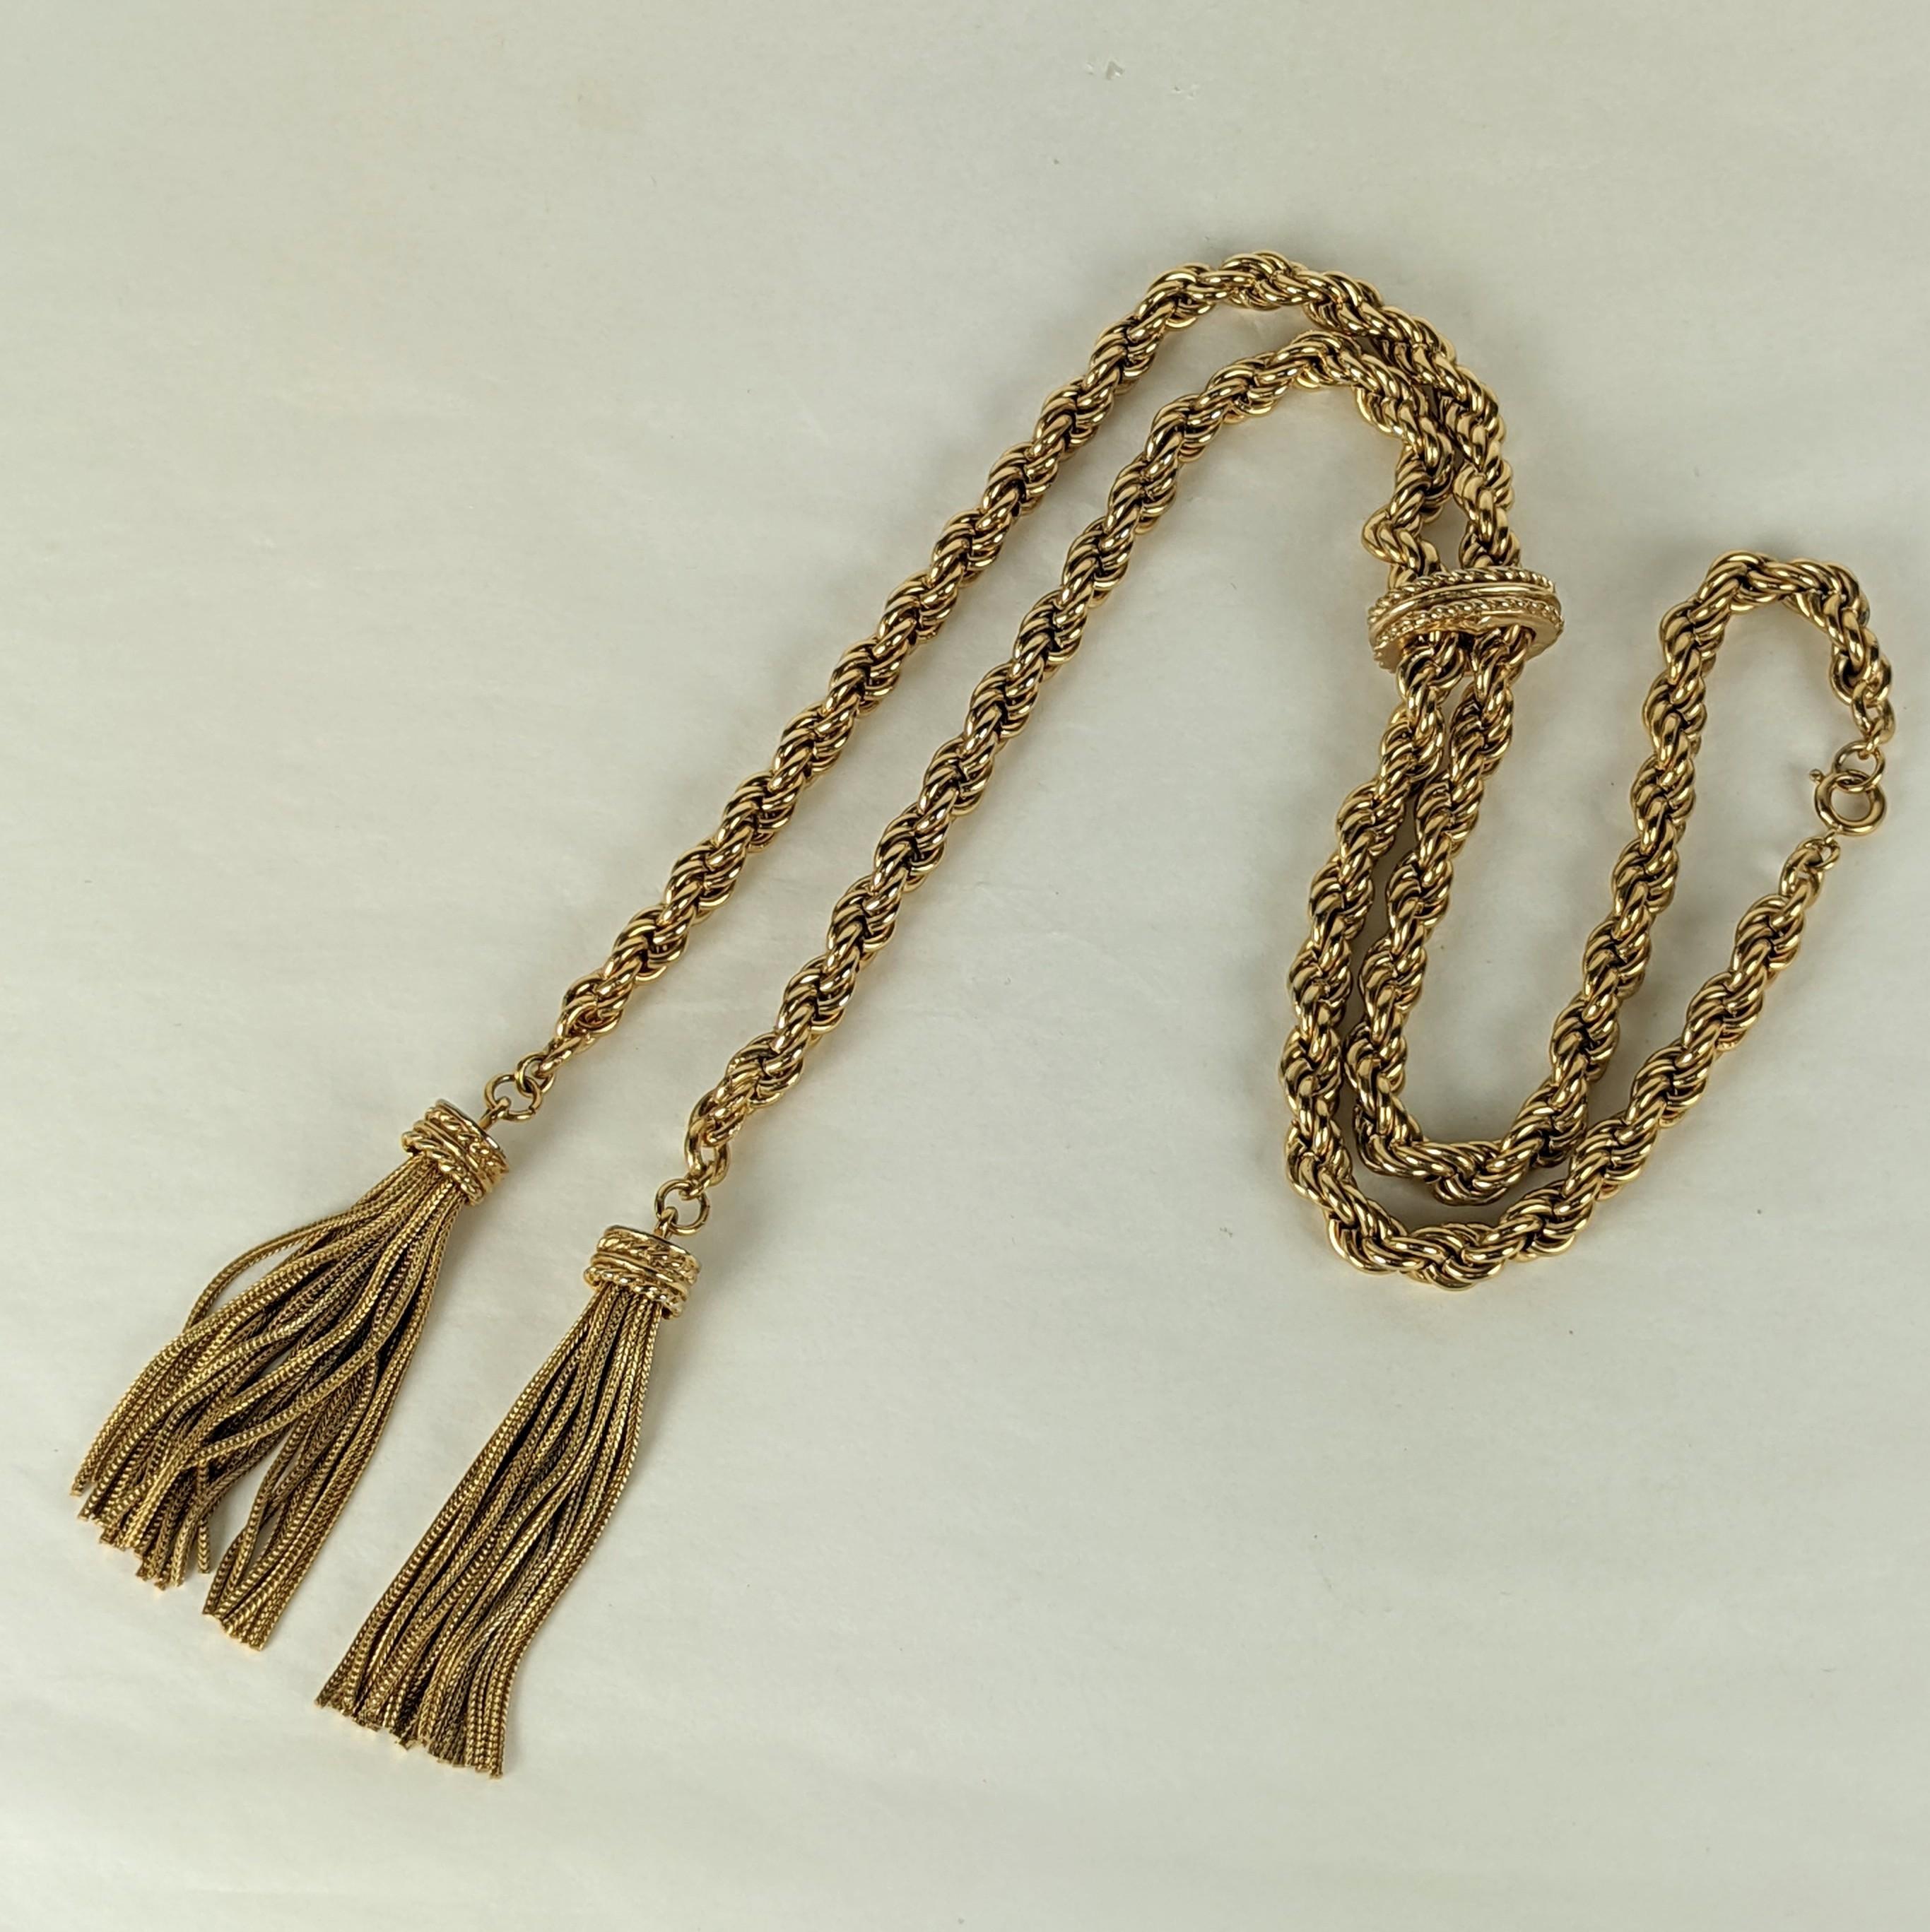 Elegant Gilt Tassel Slide Necklace from the 1950's USA. Center slide allows for lengths to be varied and different options for wear. Closure on back for entry. Heavy quality piece. 36